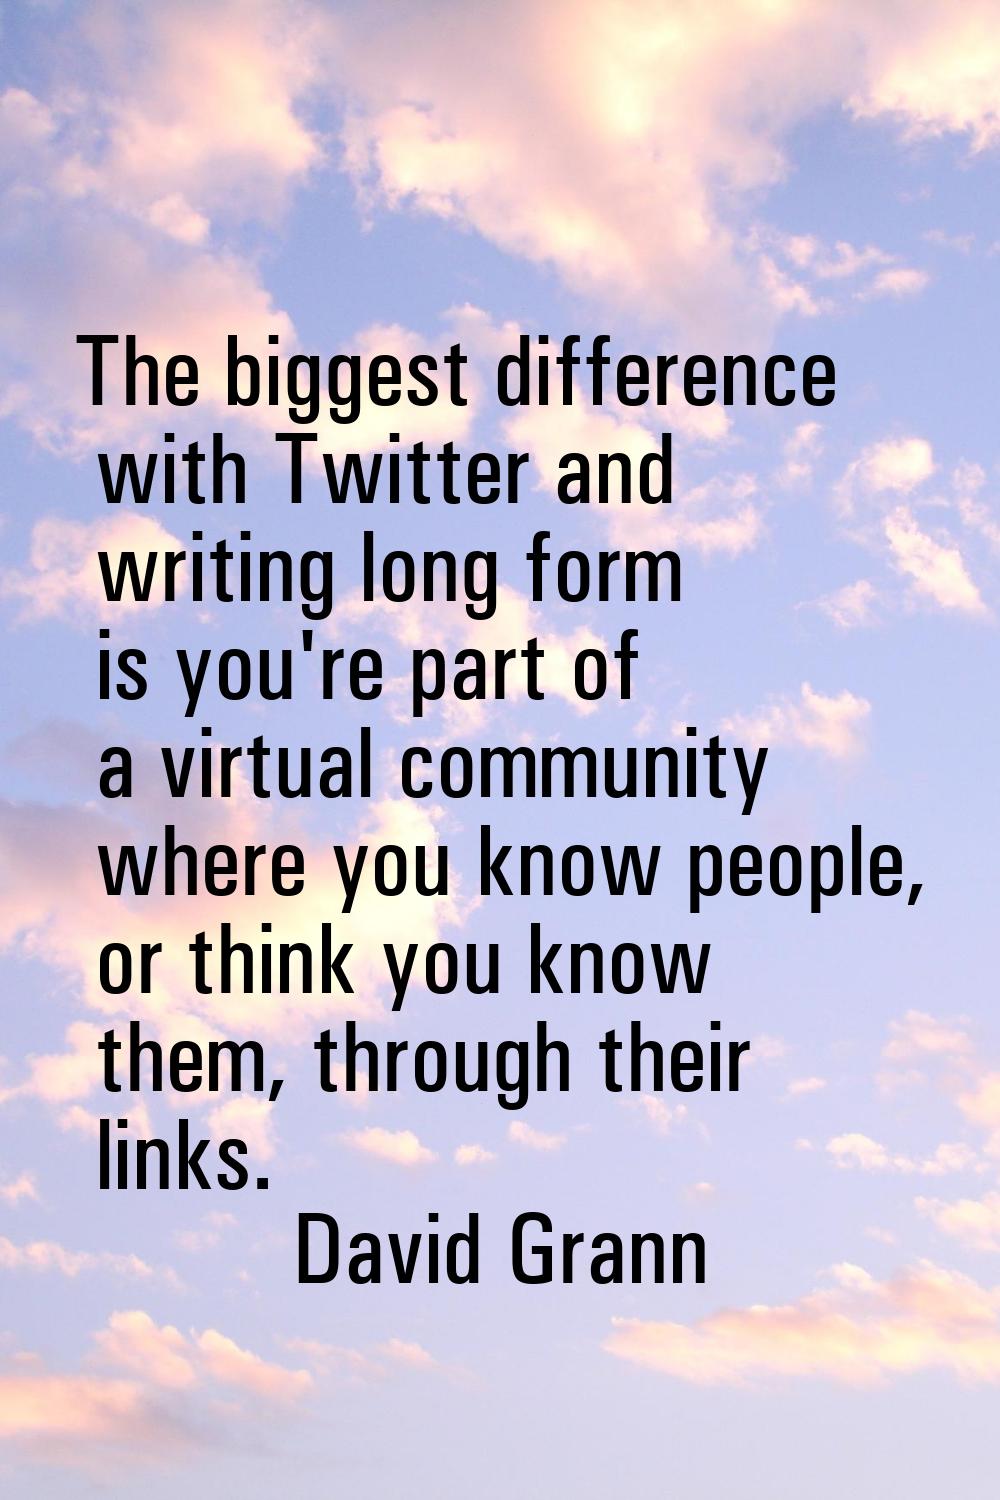 The biggest difference with Twitter and writing long form is you're part of a virtual community whe